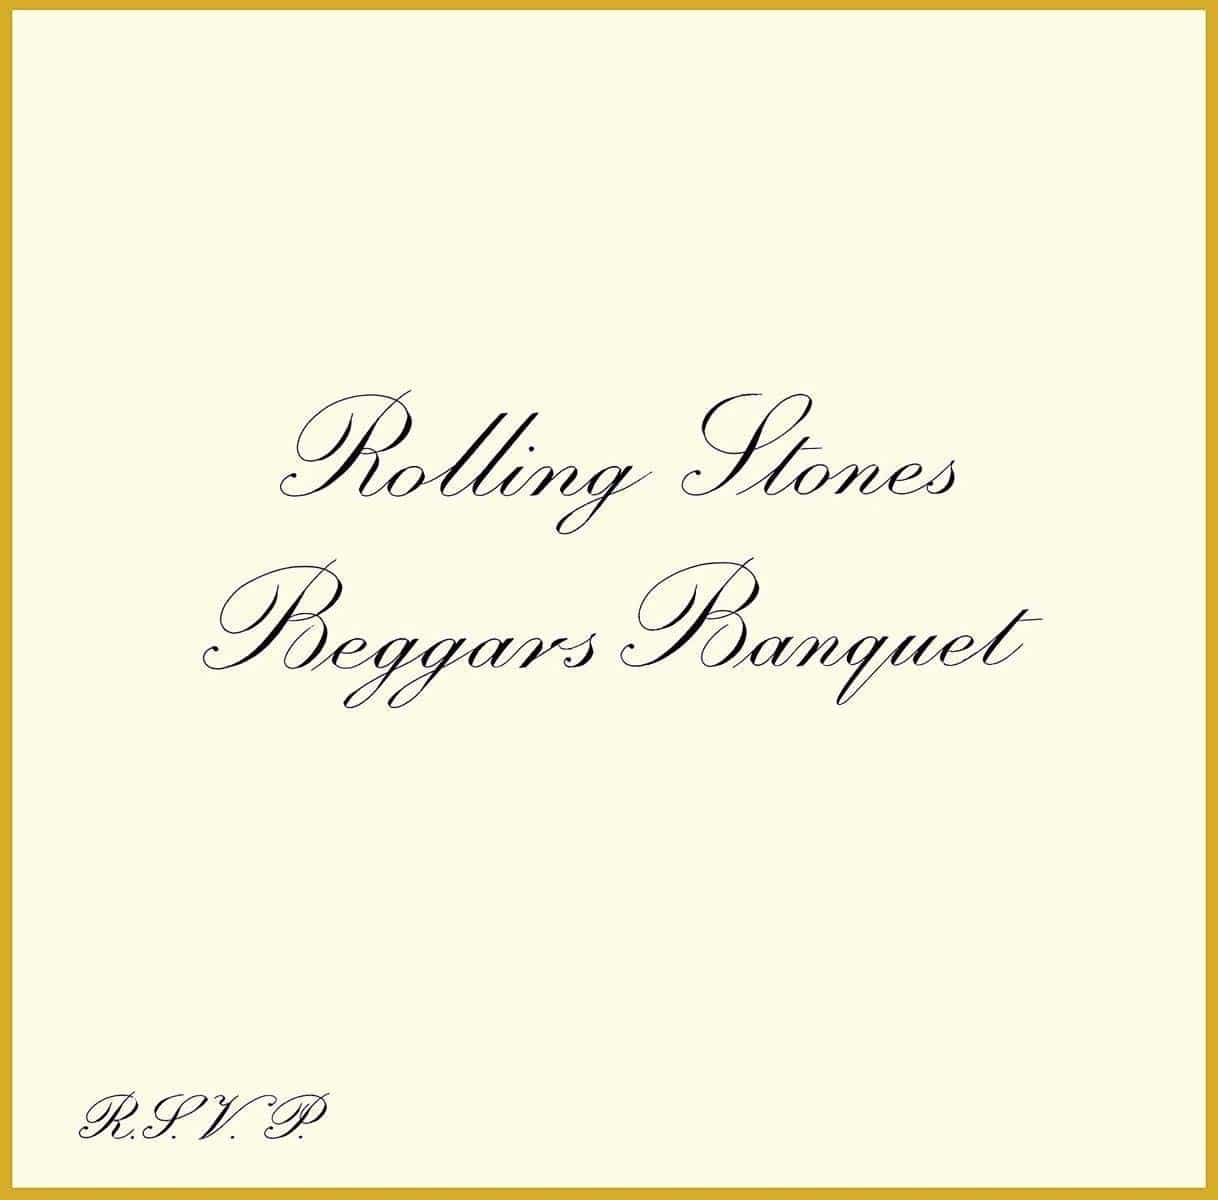 Rolling Stones: Beggars Banquet (50th Anniversary Edition)